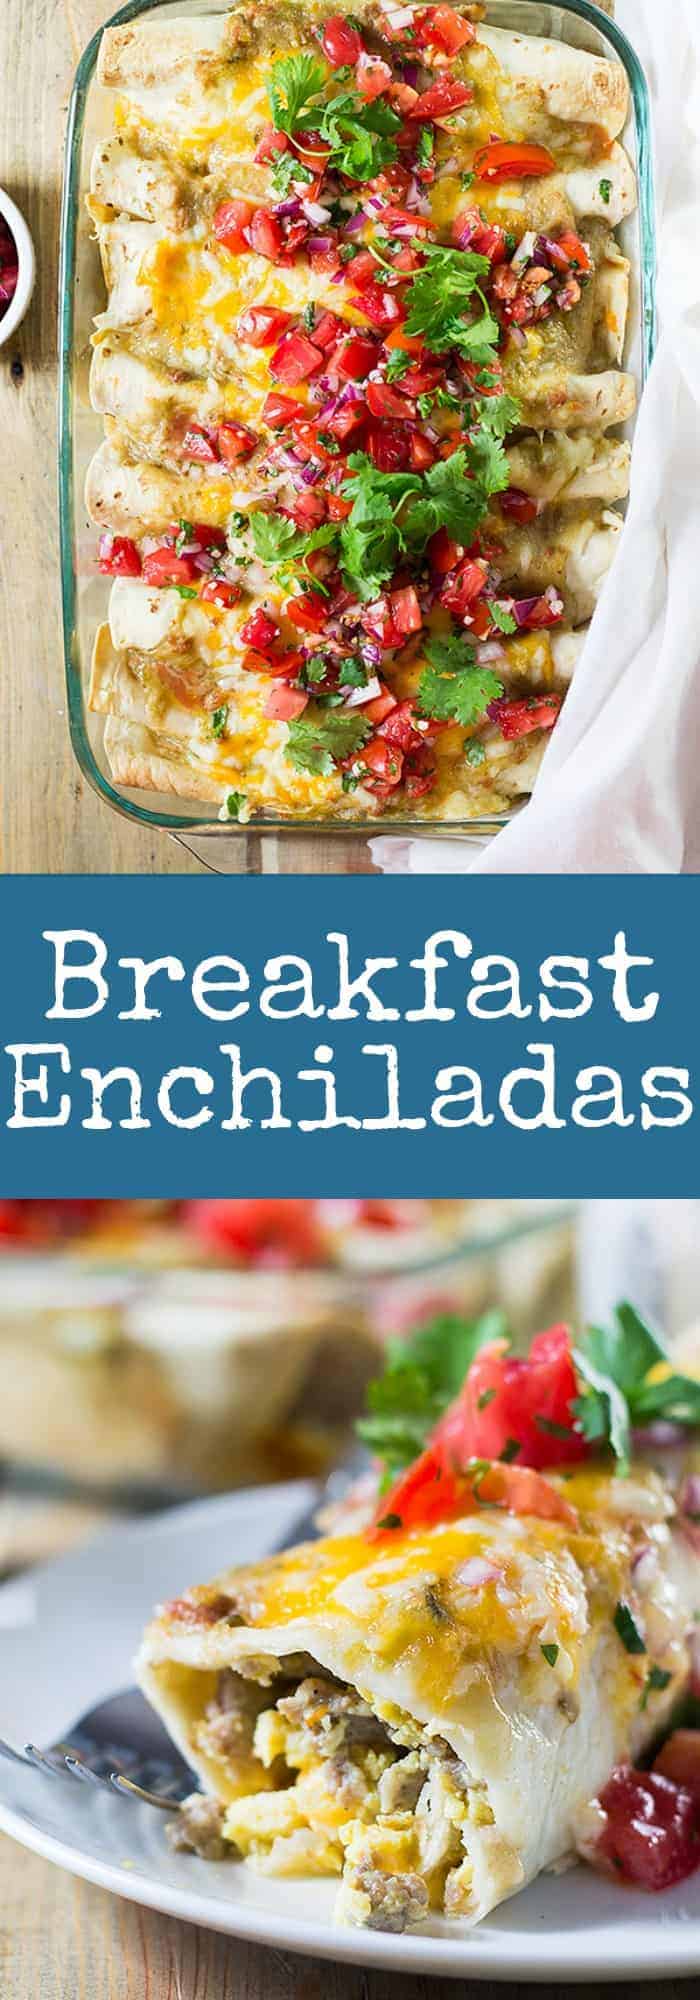 titled image (and shown): breakfast enchiladas